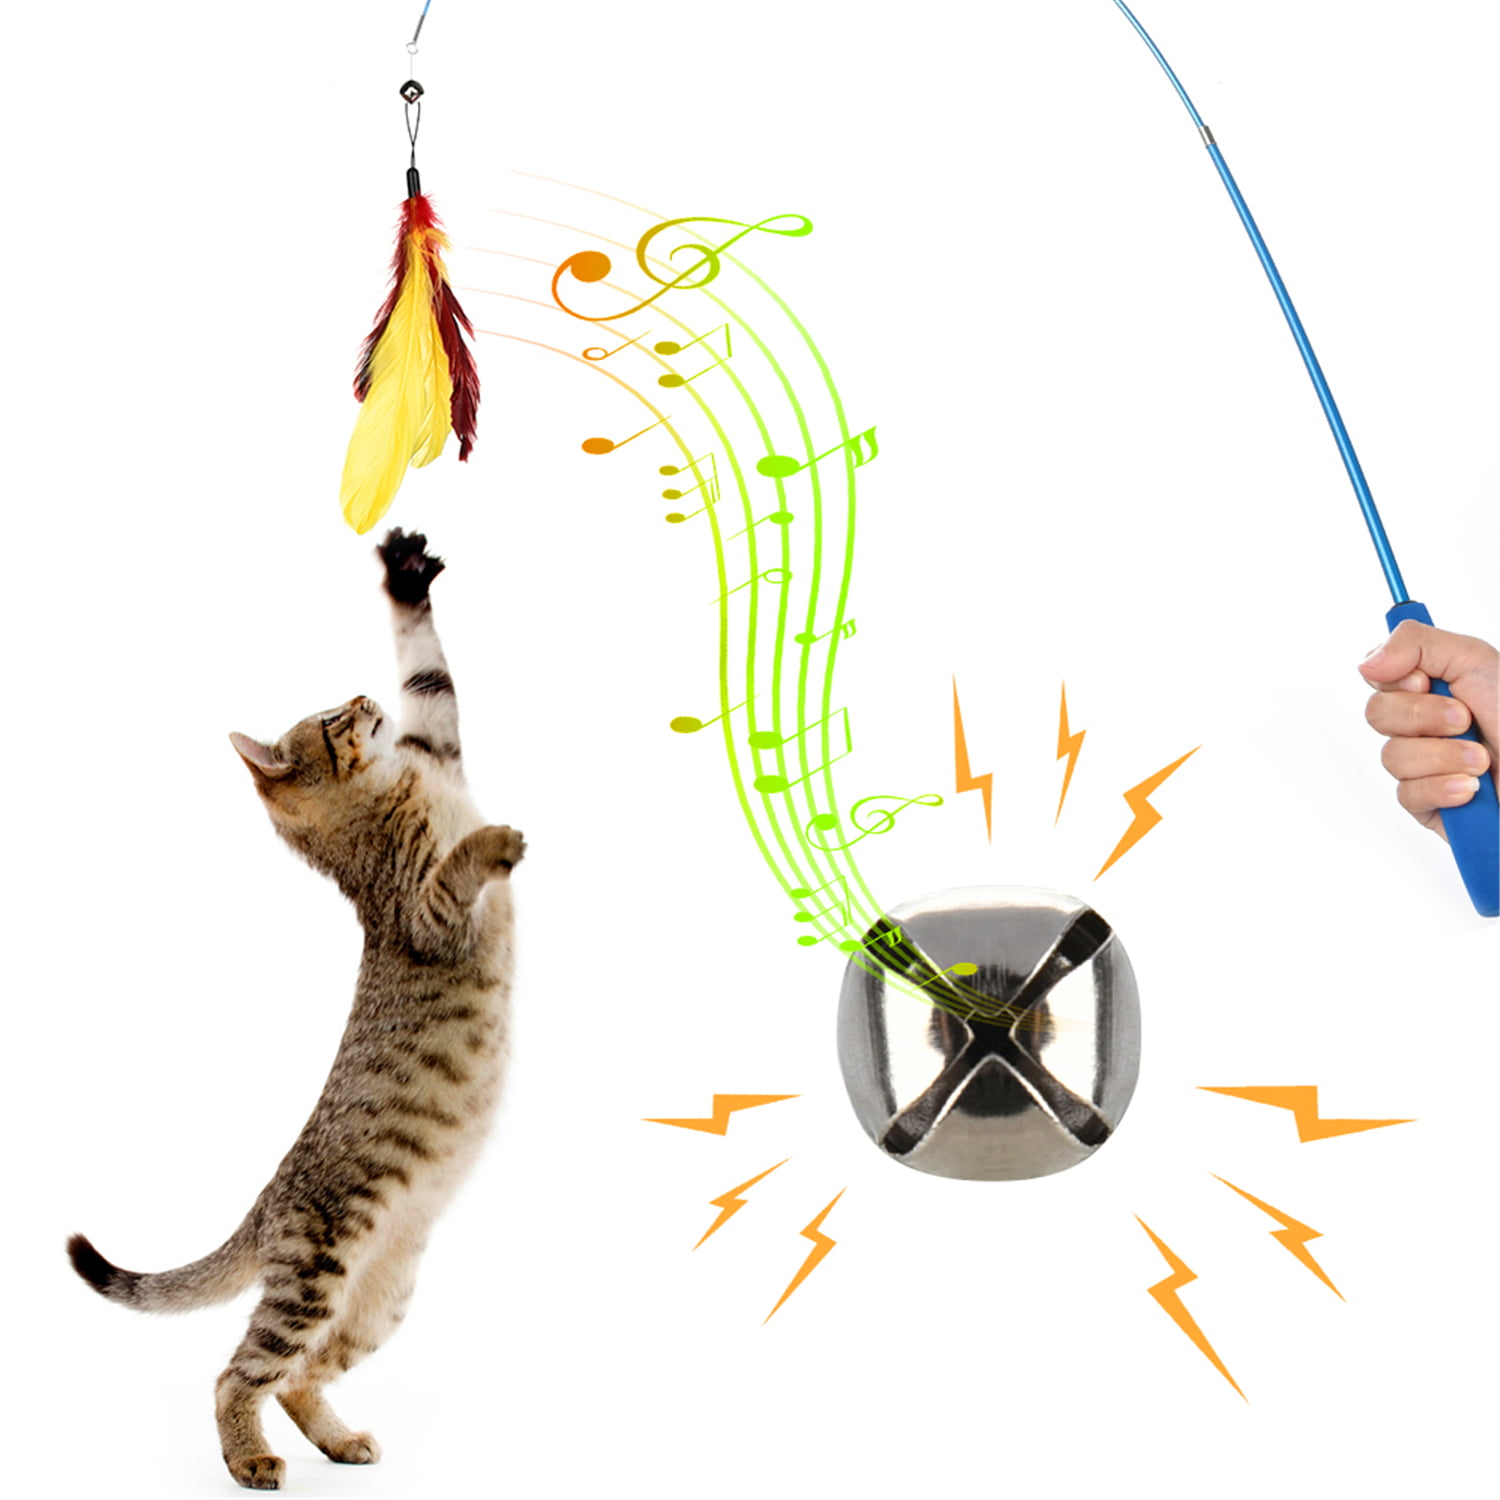 JIARON Cat Toys Feather Toy, 2PCS Retractable Cat Wand Toys and 10PCS  Replacement Teaser with Bell Refills, Interactive Catcher Teaser and Funny  Exercise for Kitten or Cats.